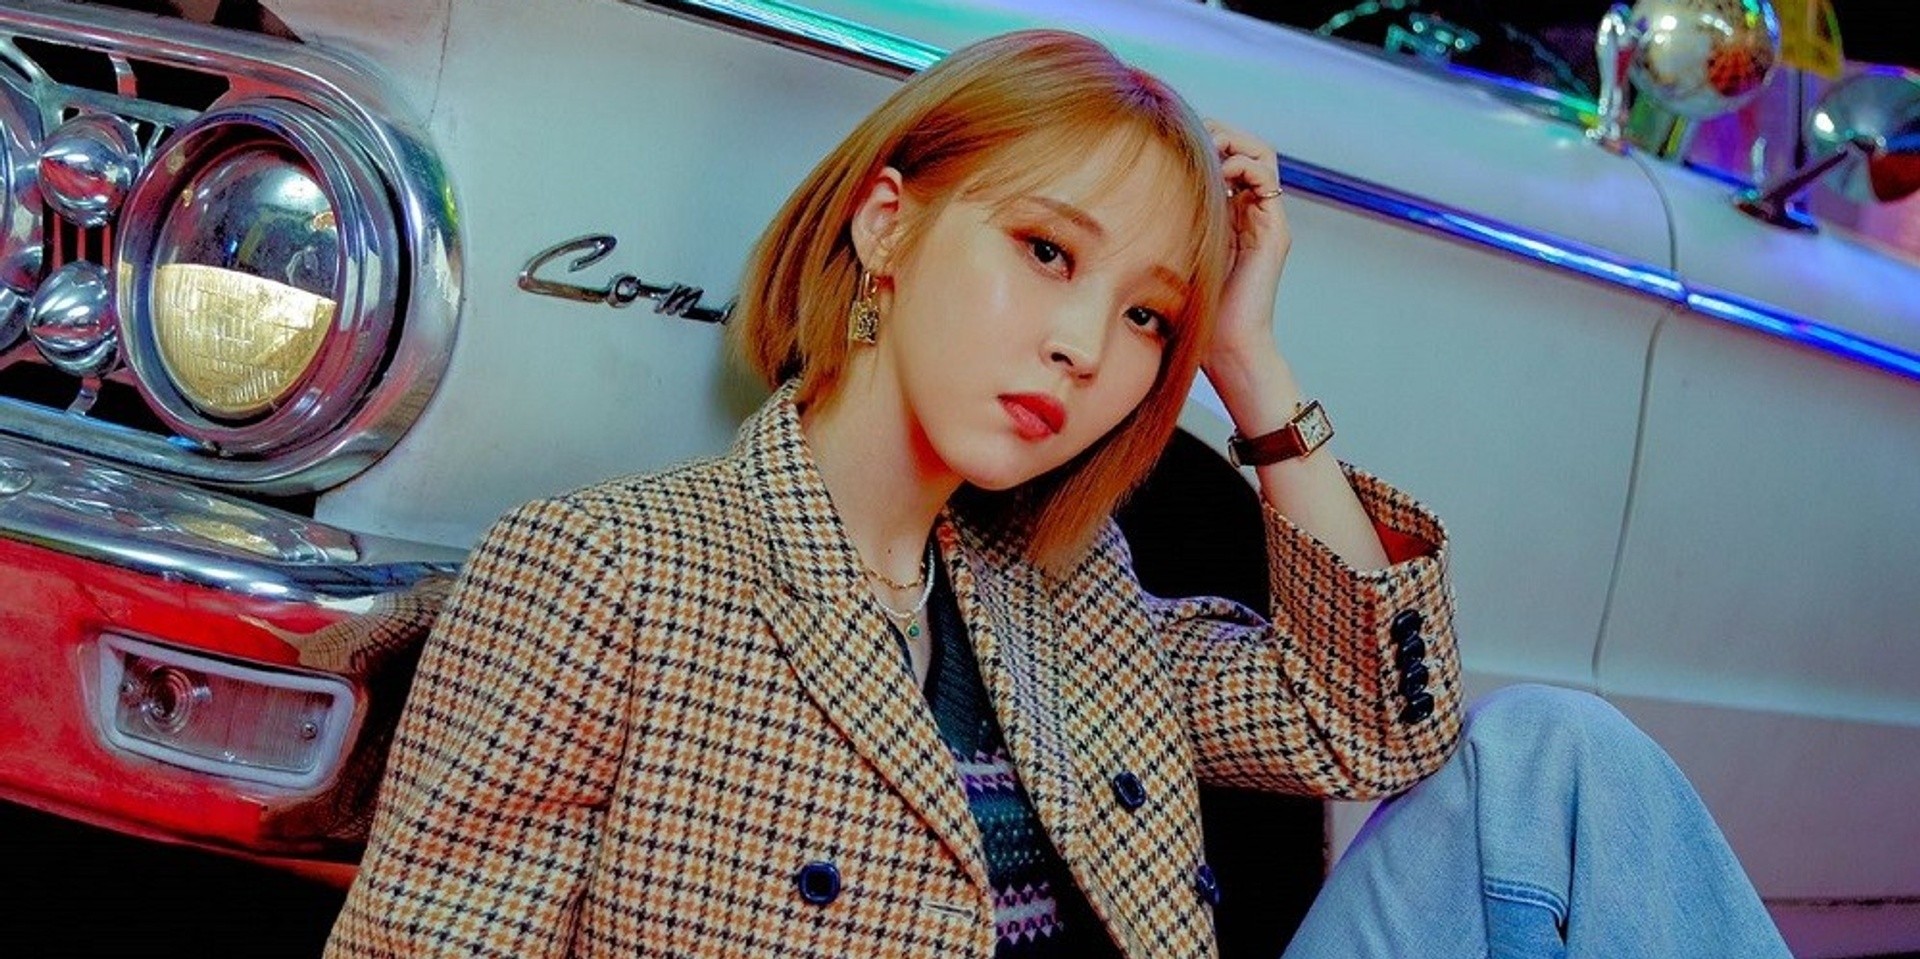 MAMAMOO Moonbyul shares birthday gift with fans full of 'Chemistry'  — watch 